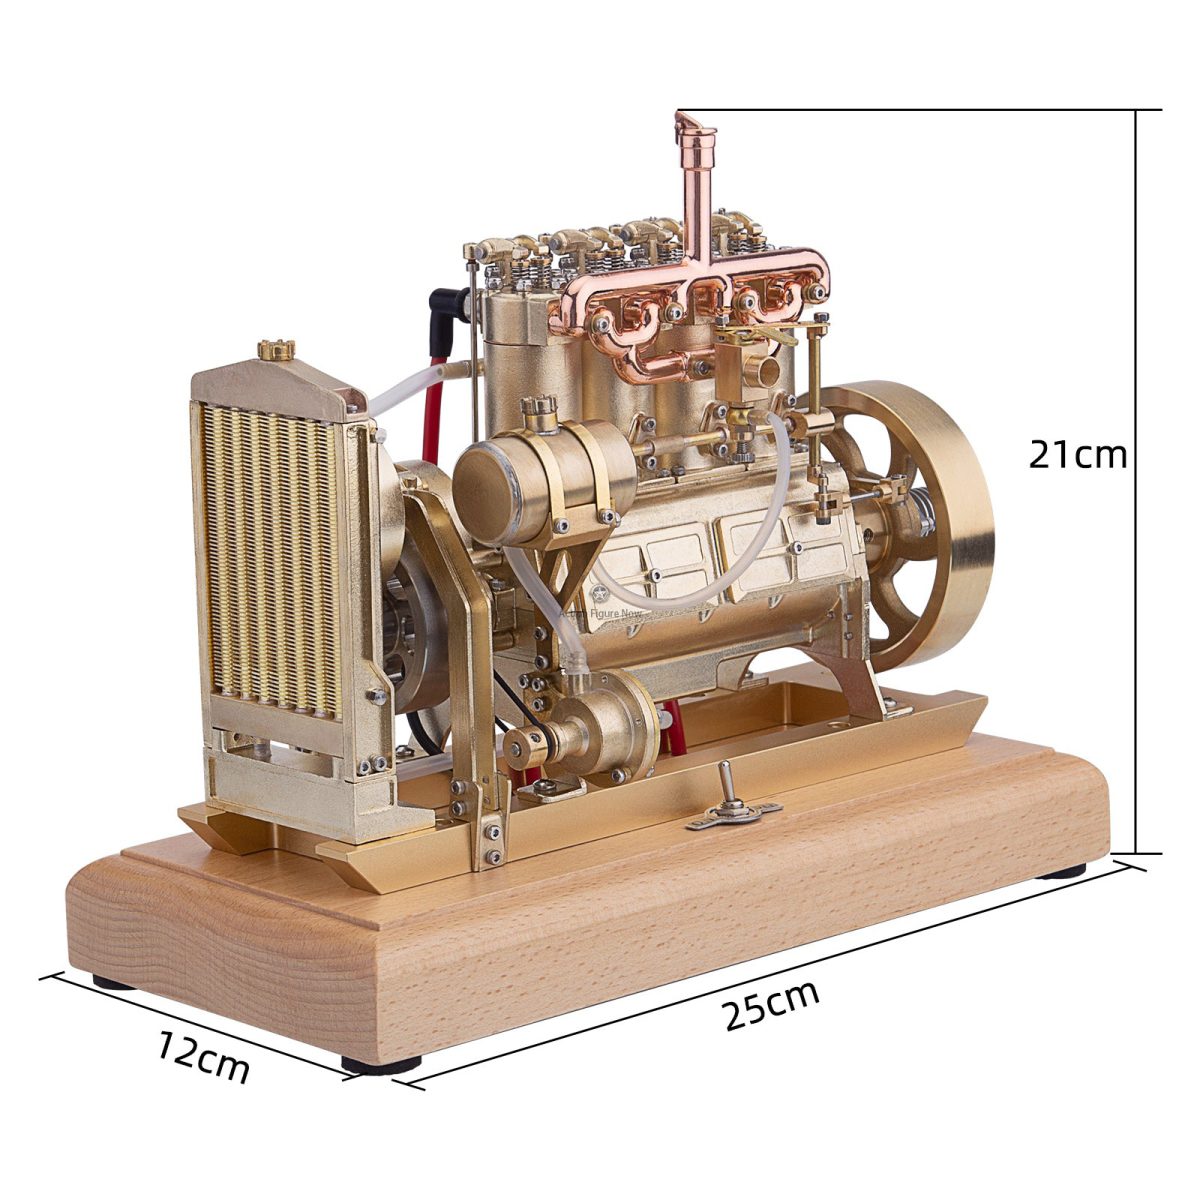 H75 12cc Vertical Single-Cylinder OHV Gas Engine Model with Mechanical Speed Limit and Complete Water Circulation Cooling System for Industrial Tractors